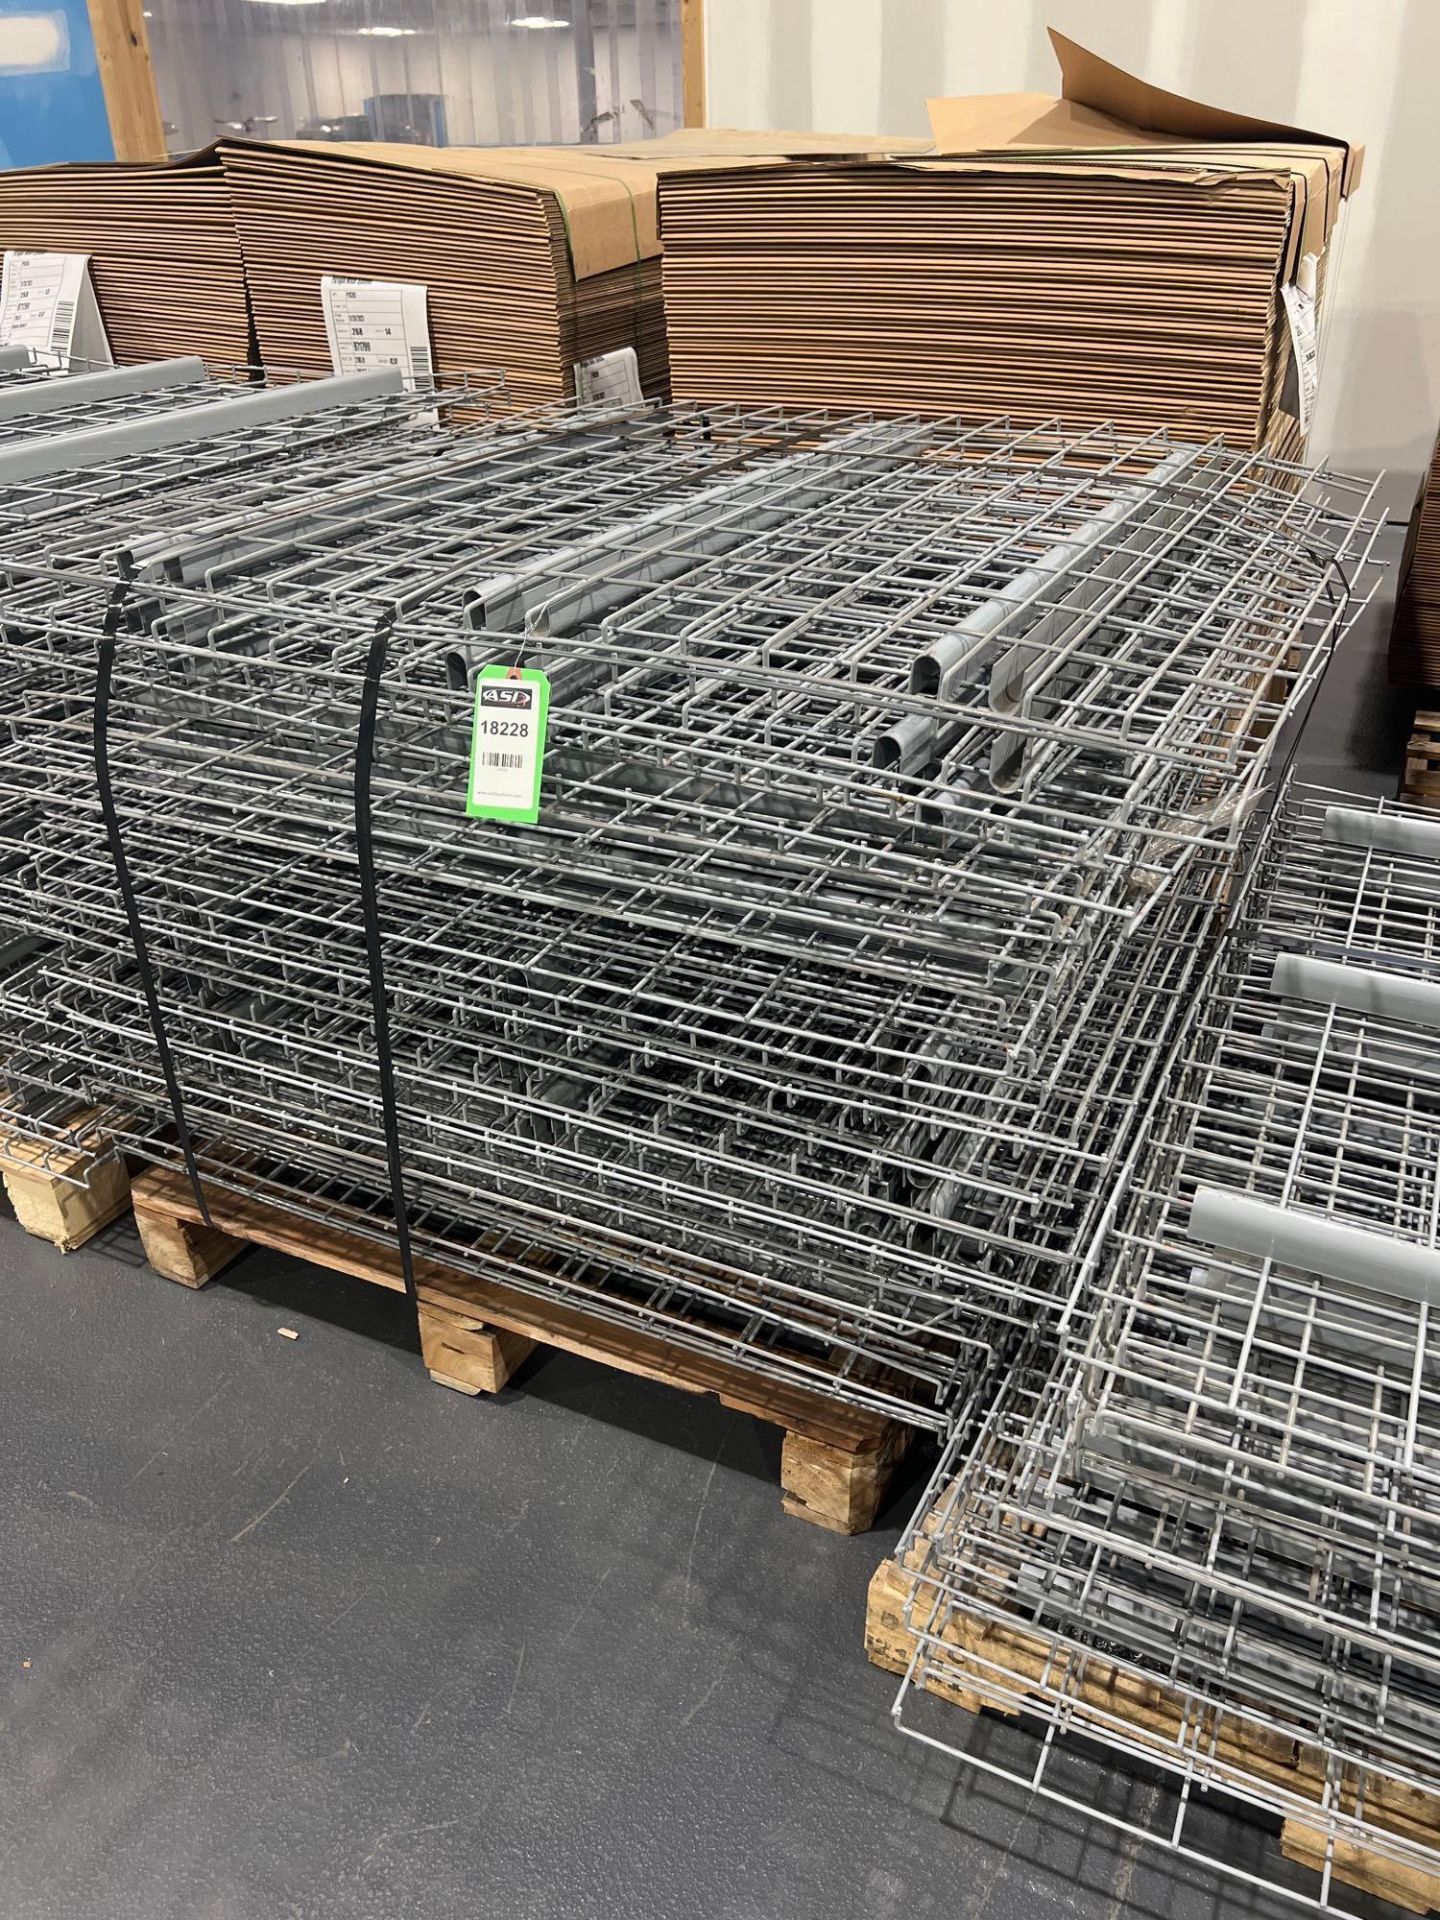 PALLET OF APPROX. 30 WIRE GRATES FOR PALLET RACKING, APPROX. DIMENSIONS 43" X 45" - Image 4 of 4